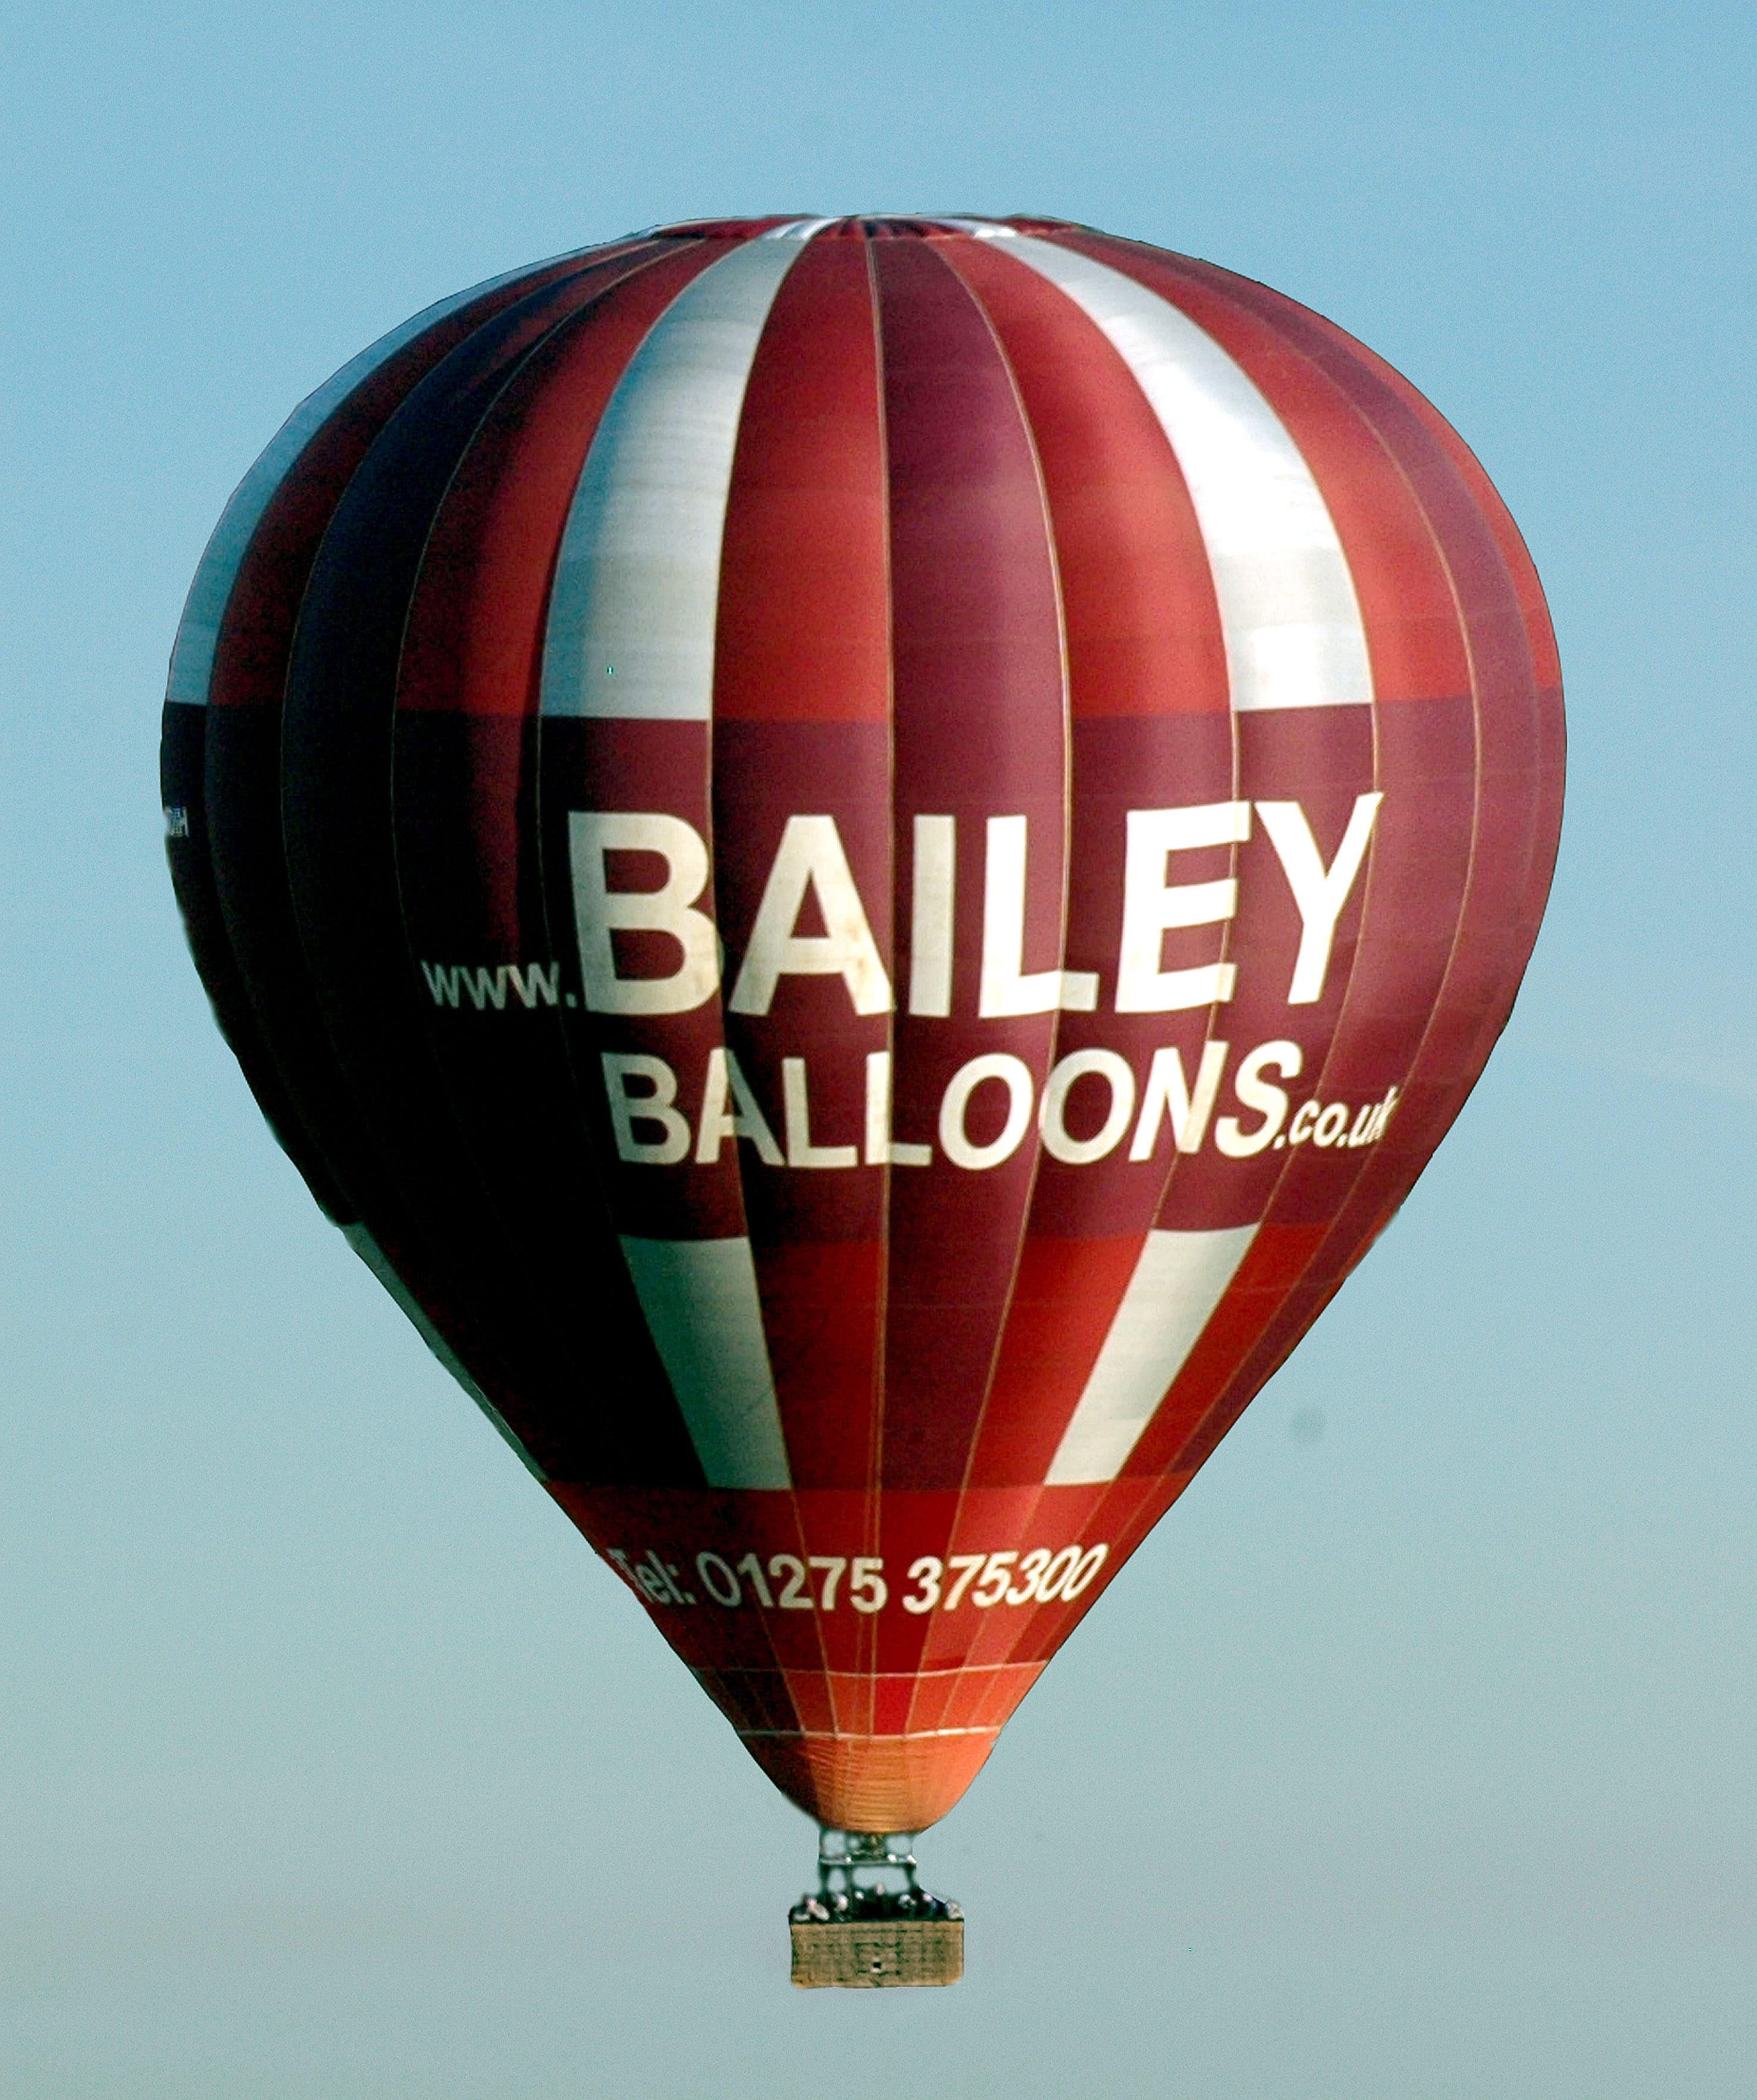 Galway to host National Hot Air Balloon Championships Bailey Balloons